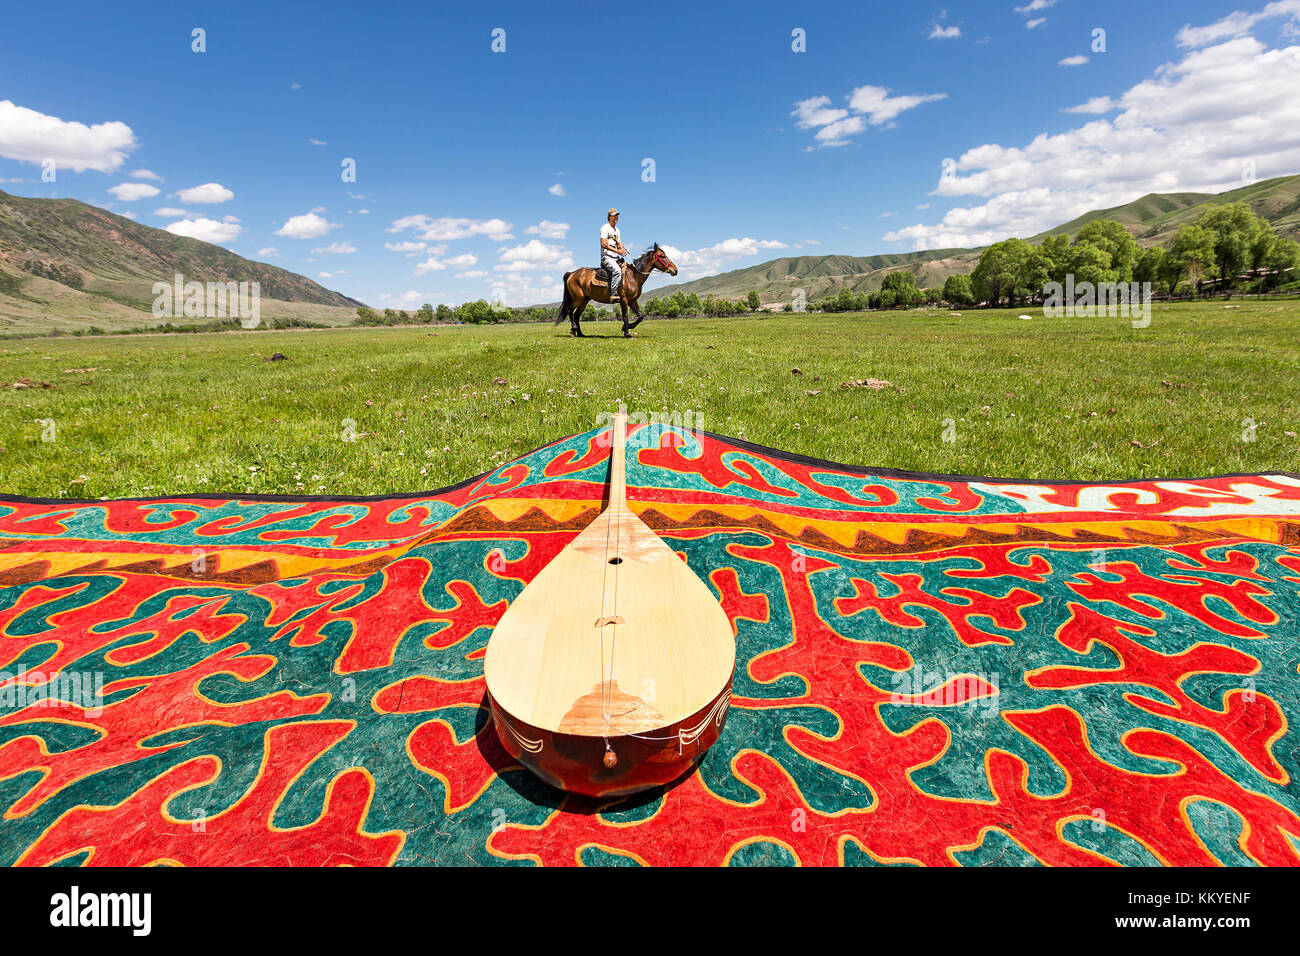 Kazakh national musical instrument known as Dombra and a horse rider, in Saty Village, Kazakhstan. Stock Photo